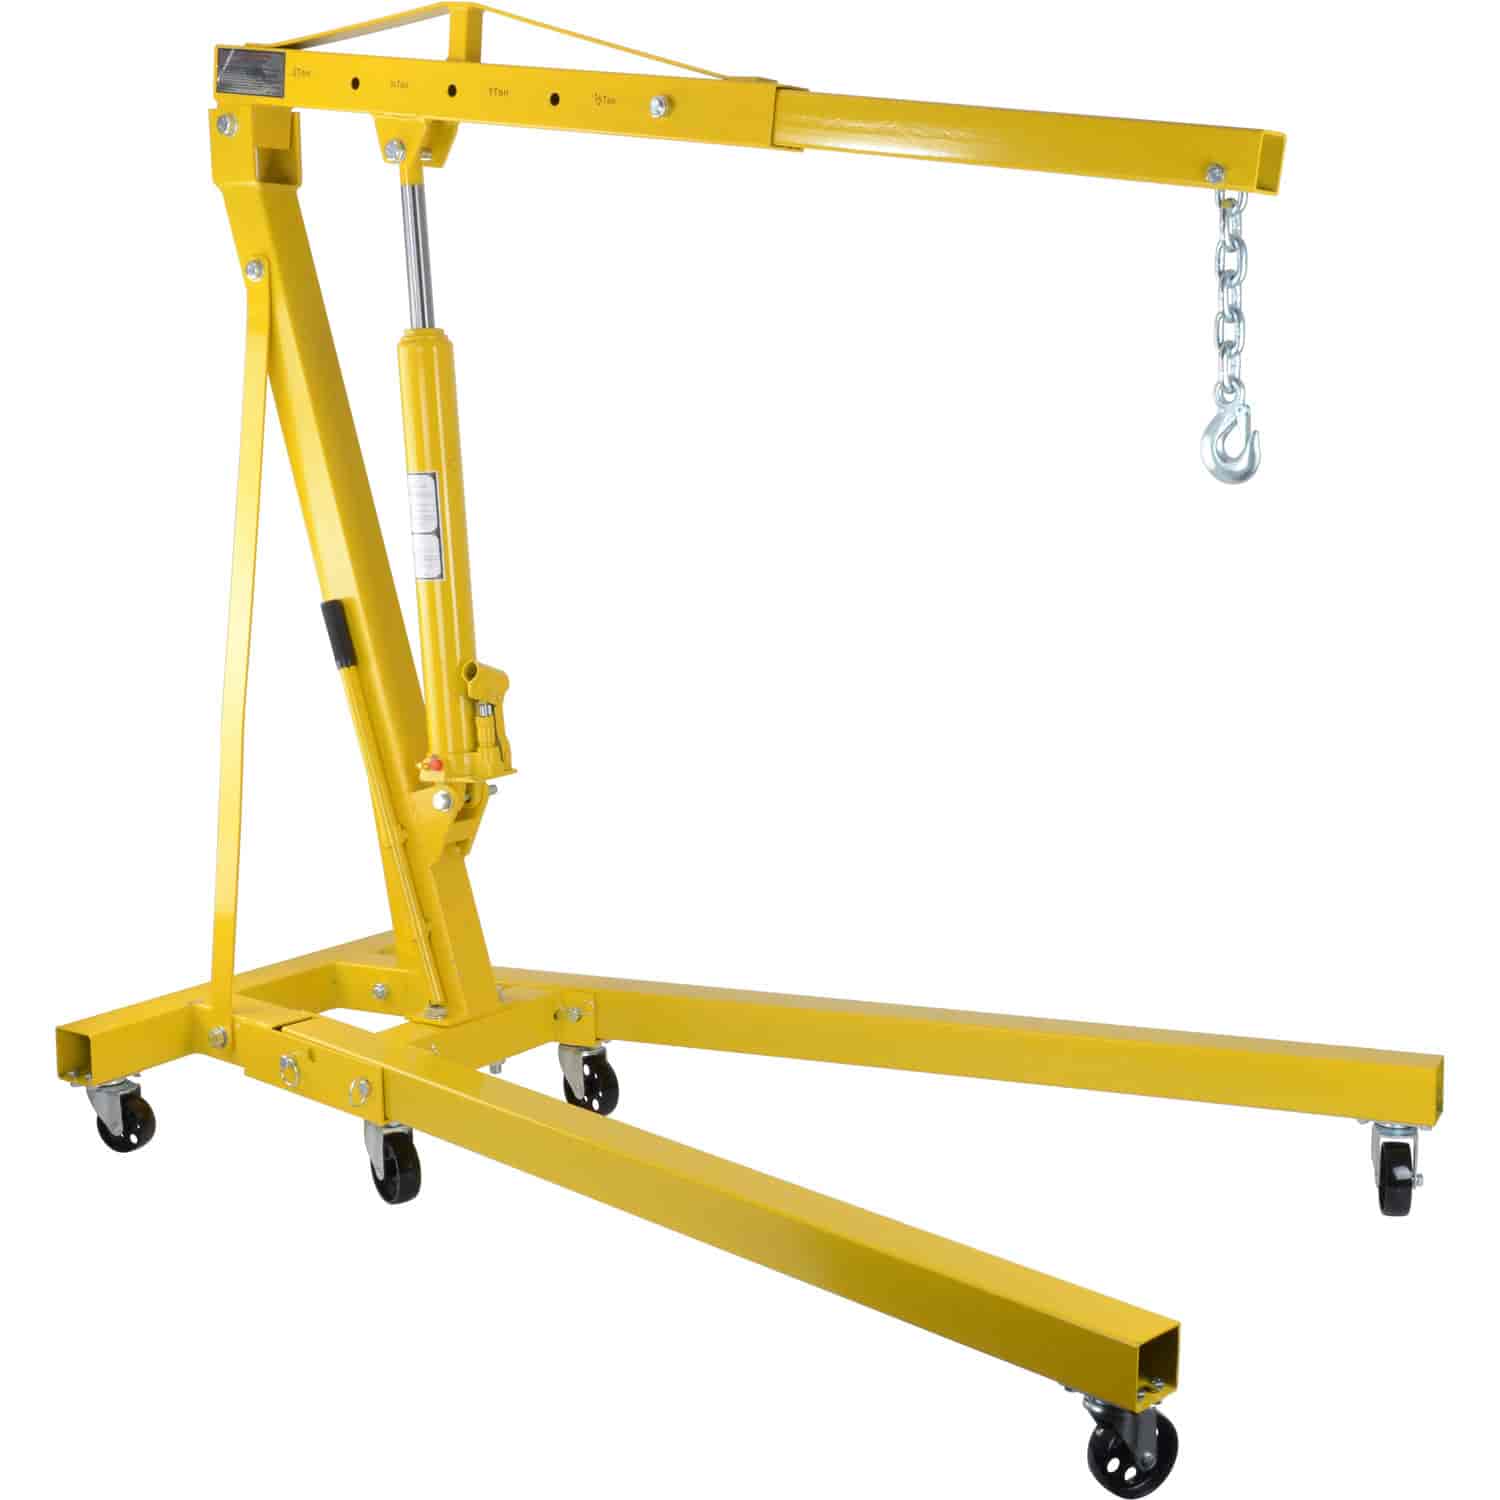 2-Ton Automotive Shop Crane [Boom Operating Range: 41 3/8 in. to 62 1/2 in.]